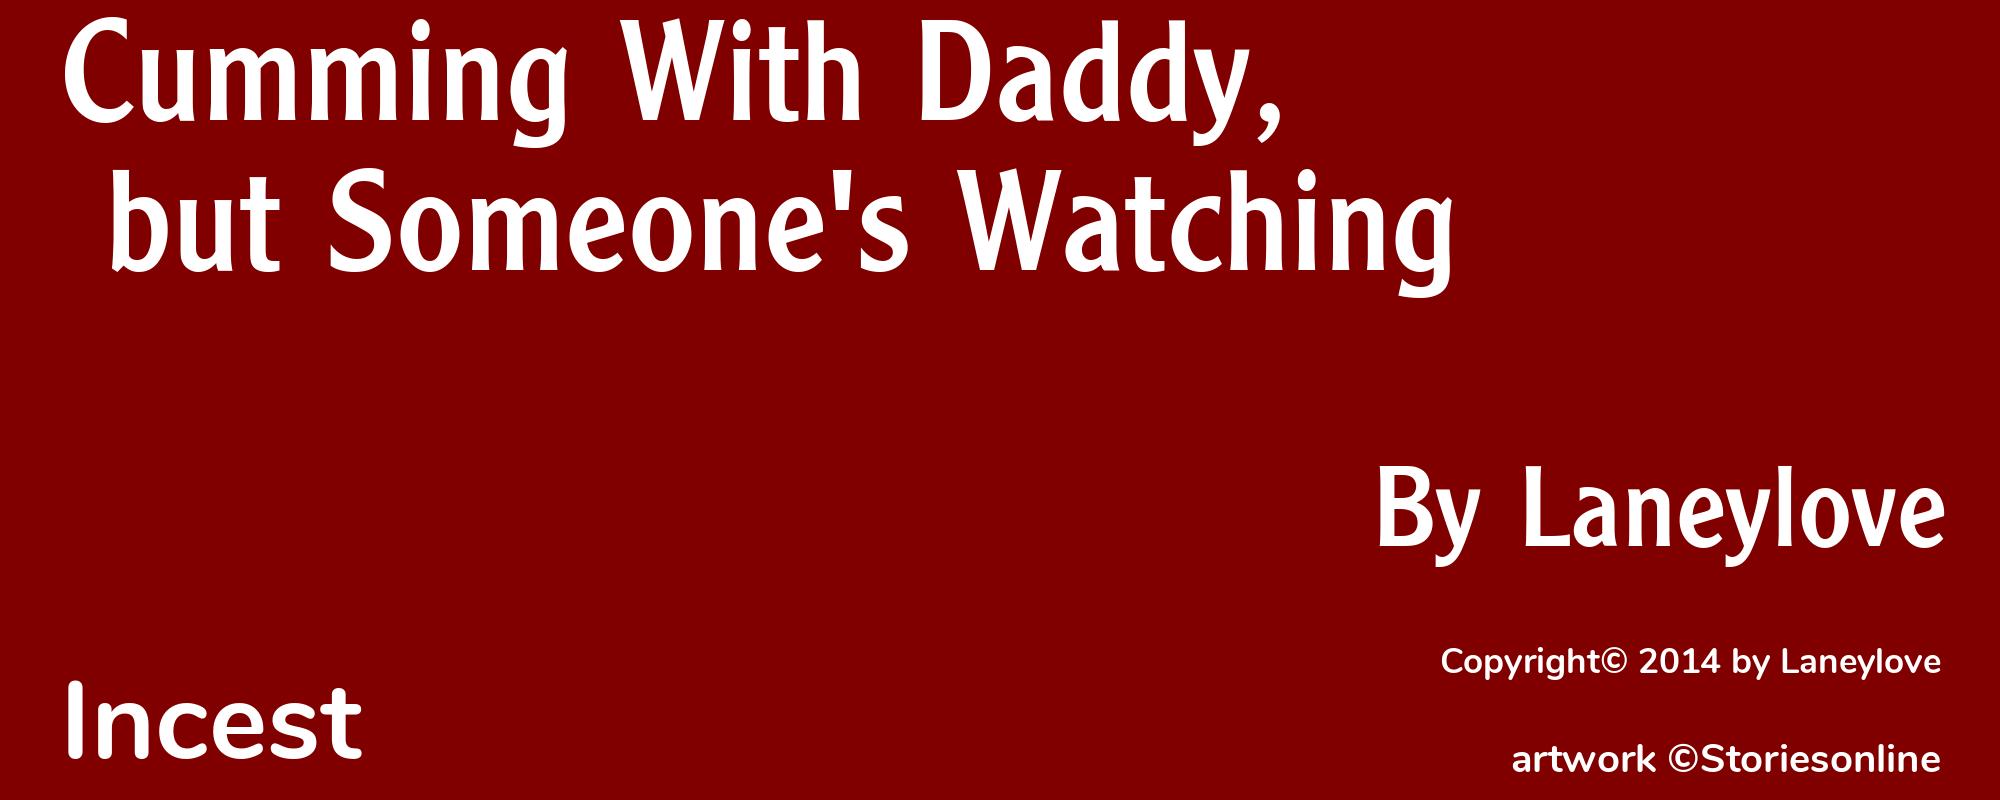 Cumming With Daddy, but Someone's Watching - Cover